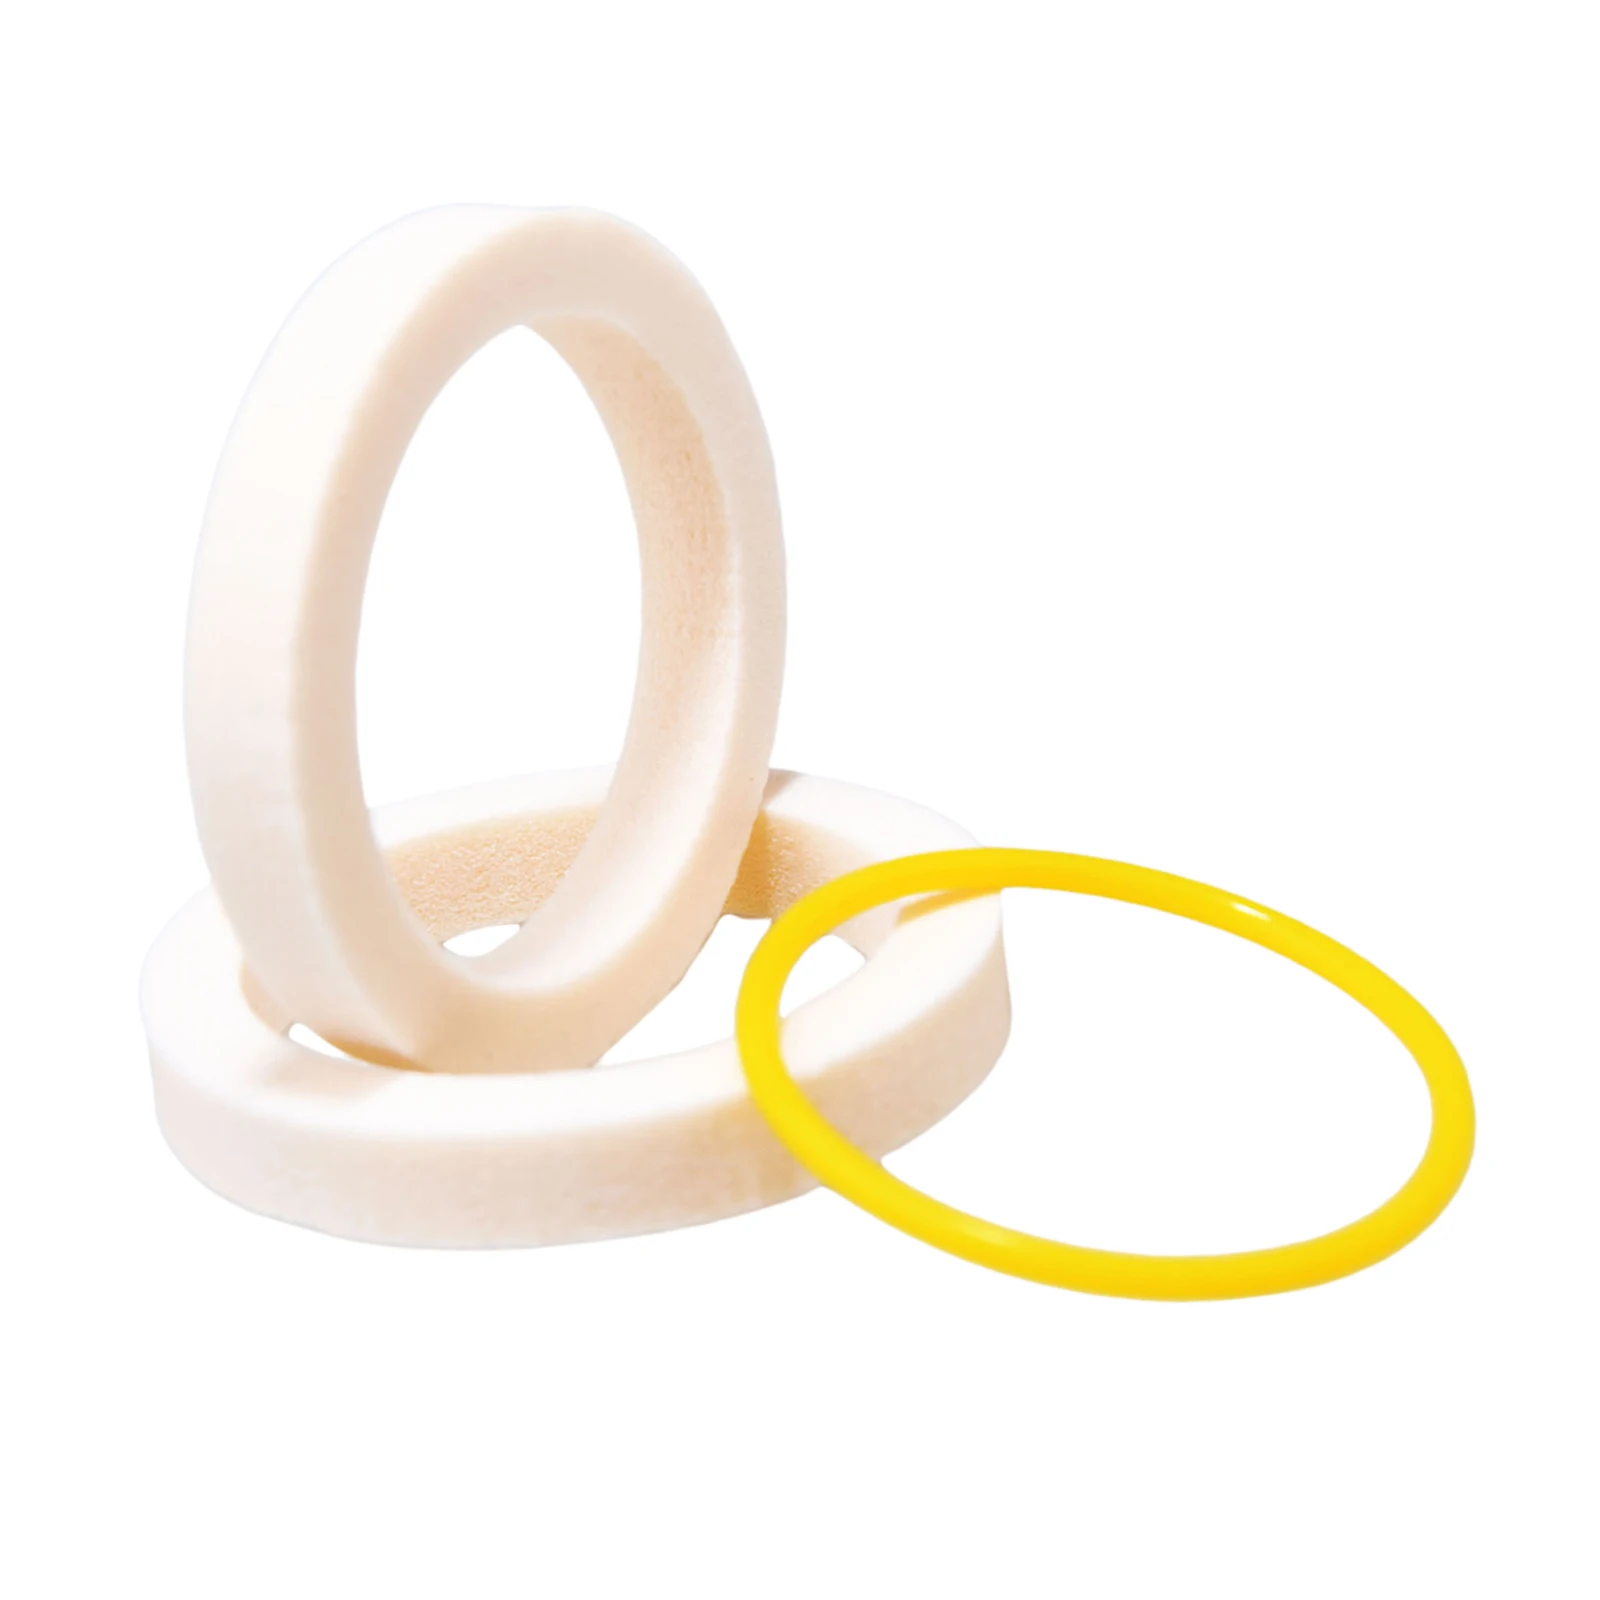 2pcs Bike Oil Seal Rings Bicycle Front Fork Lubrication Dust Seal Sponge Ring Foam Washer with Rubber Ring Fits for Rock Shox